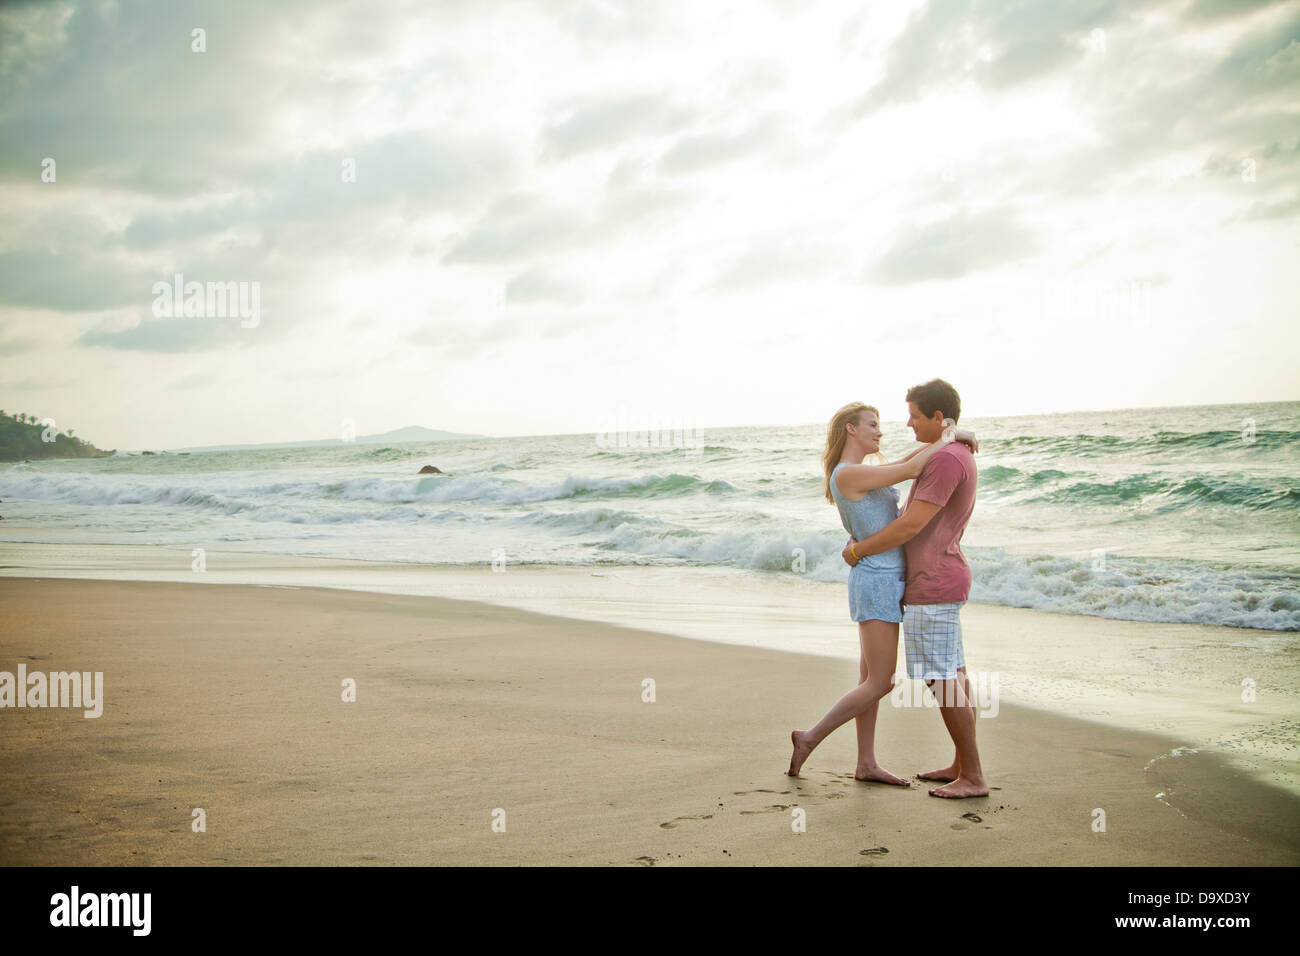 Couple on beach Banque D'Images